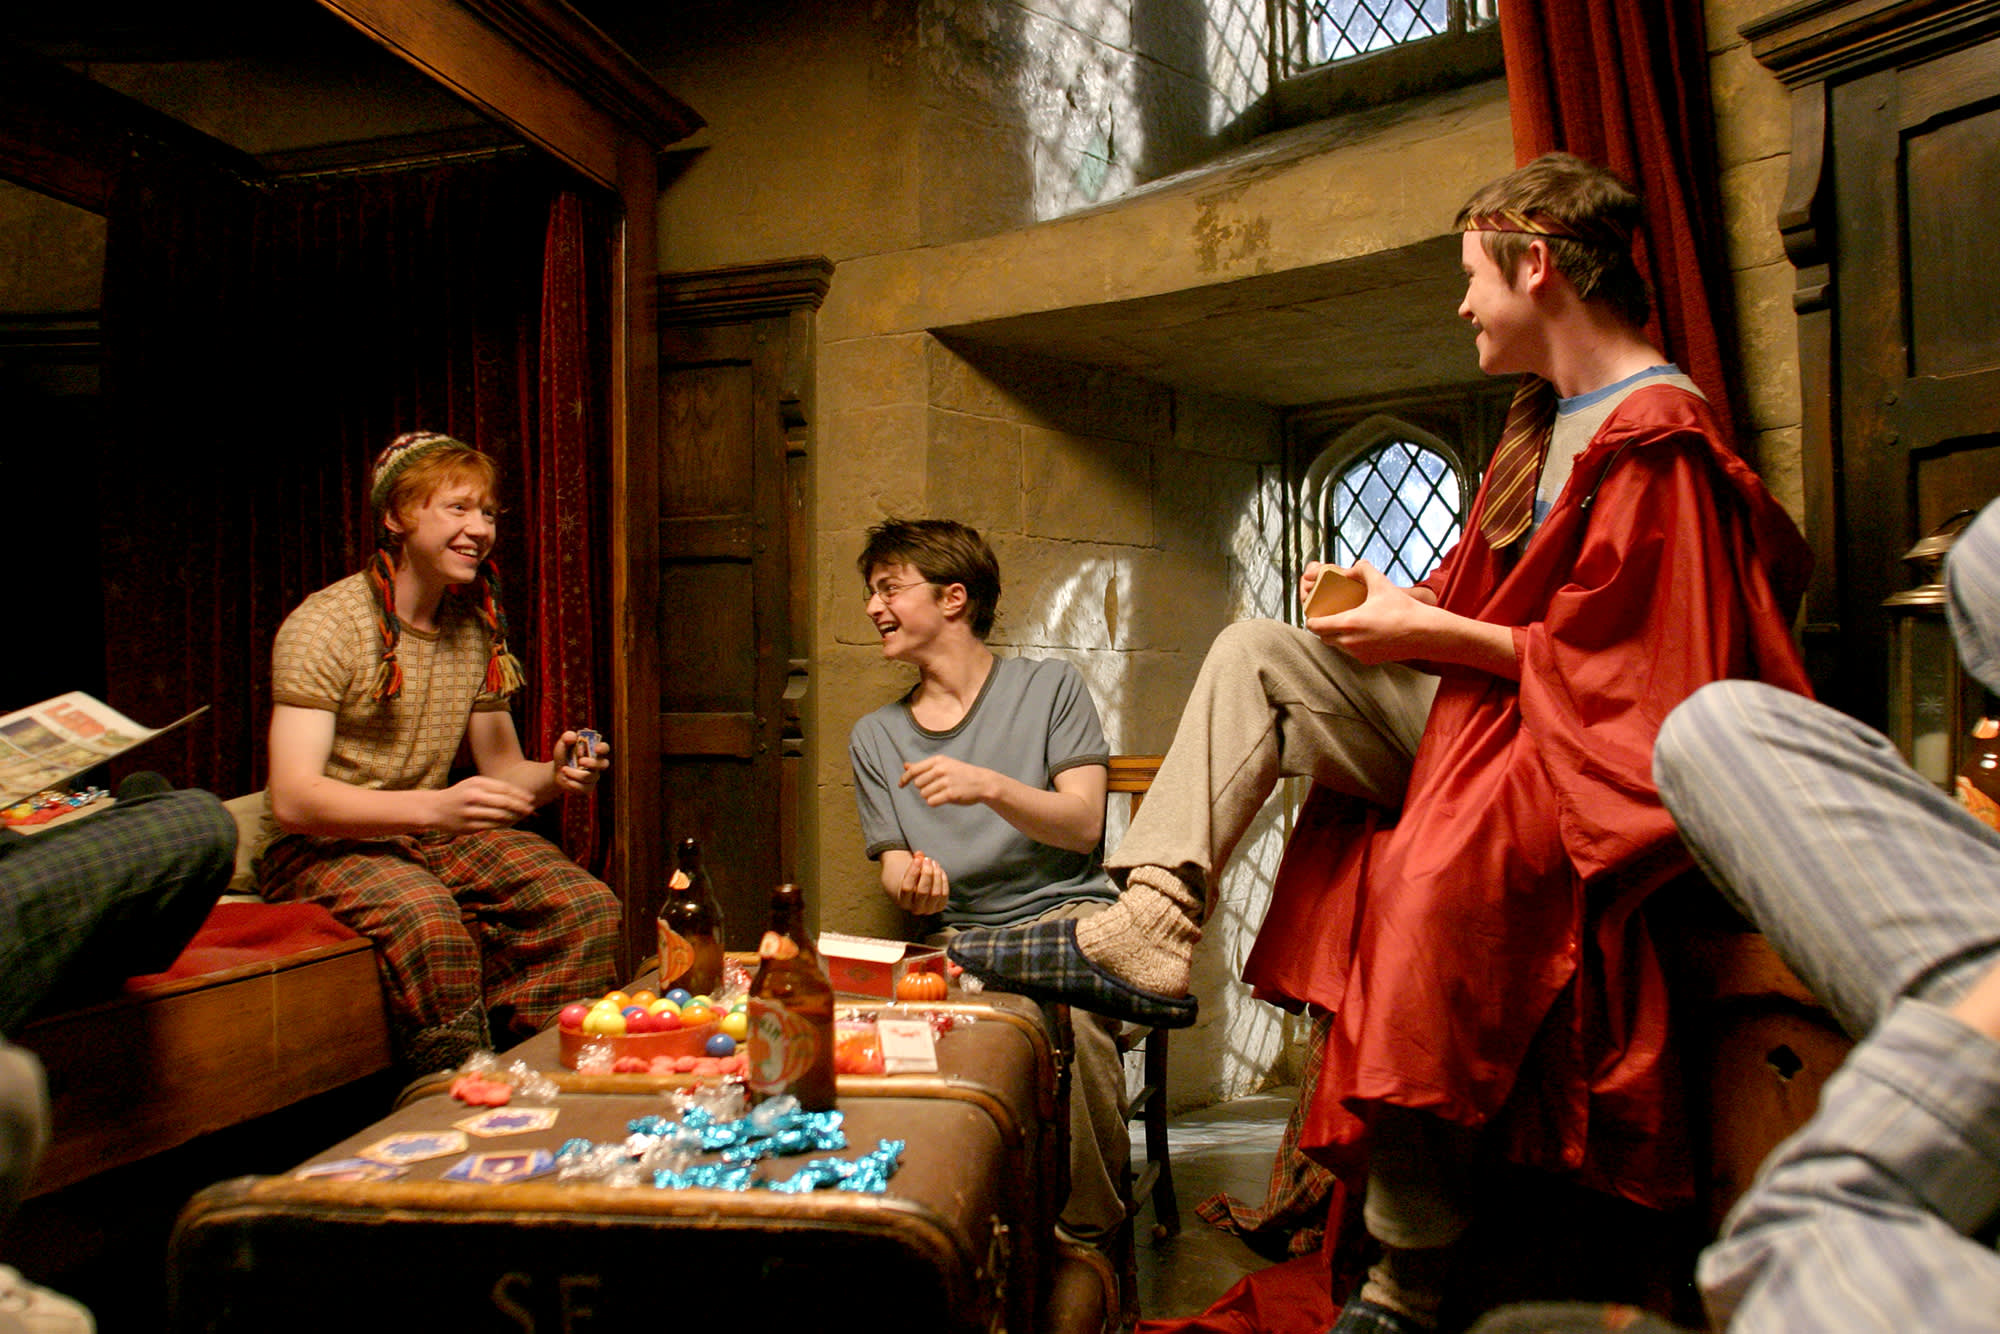 Harry and Ron eat sweets in the Gryffindor common room, laughing.